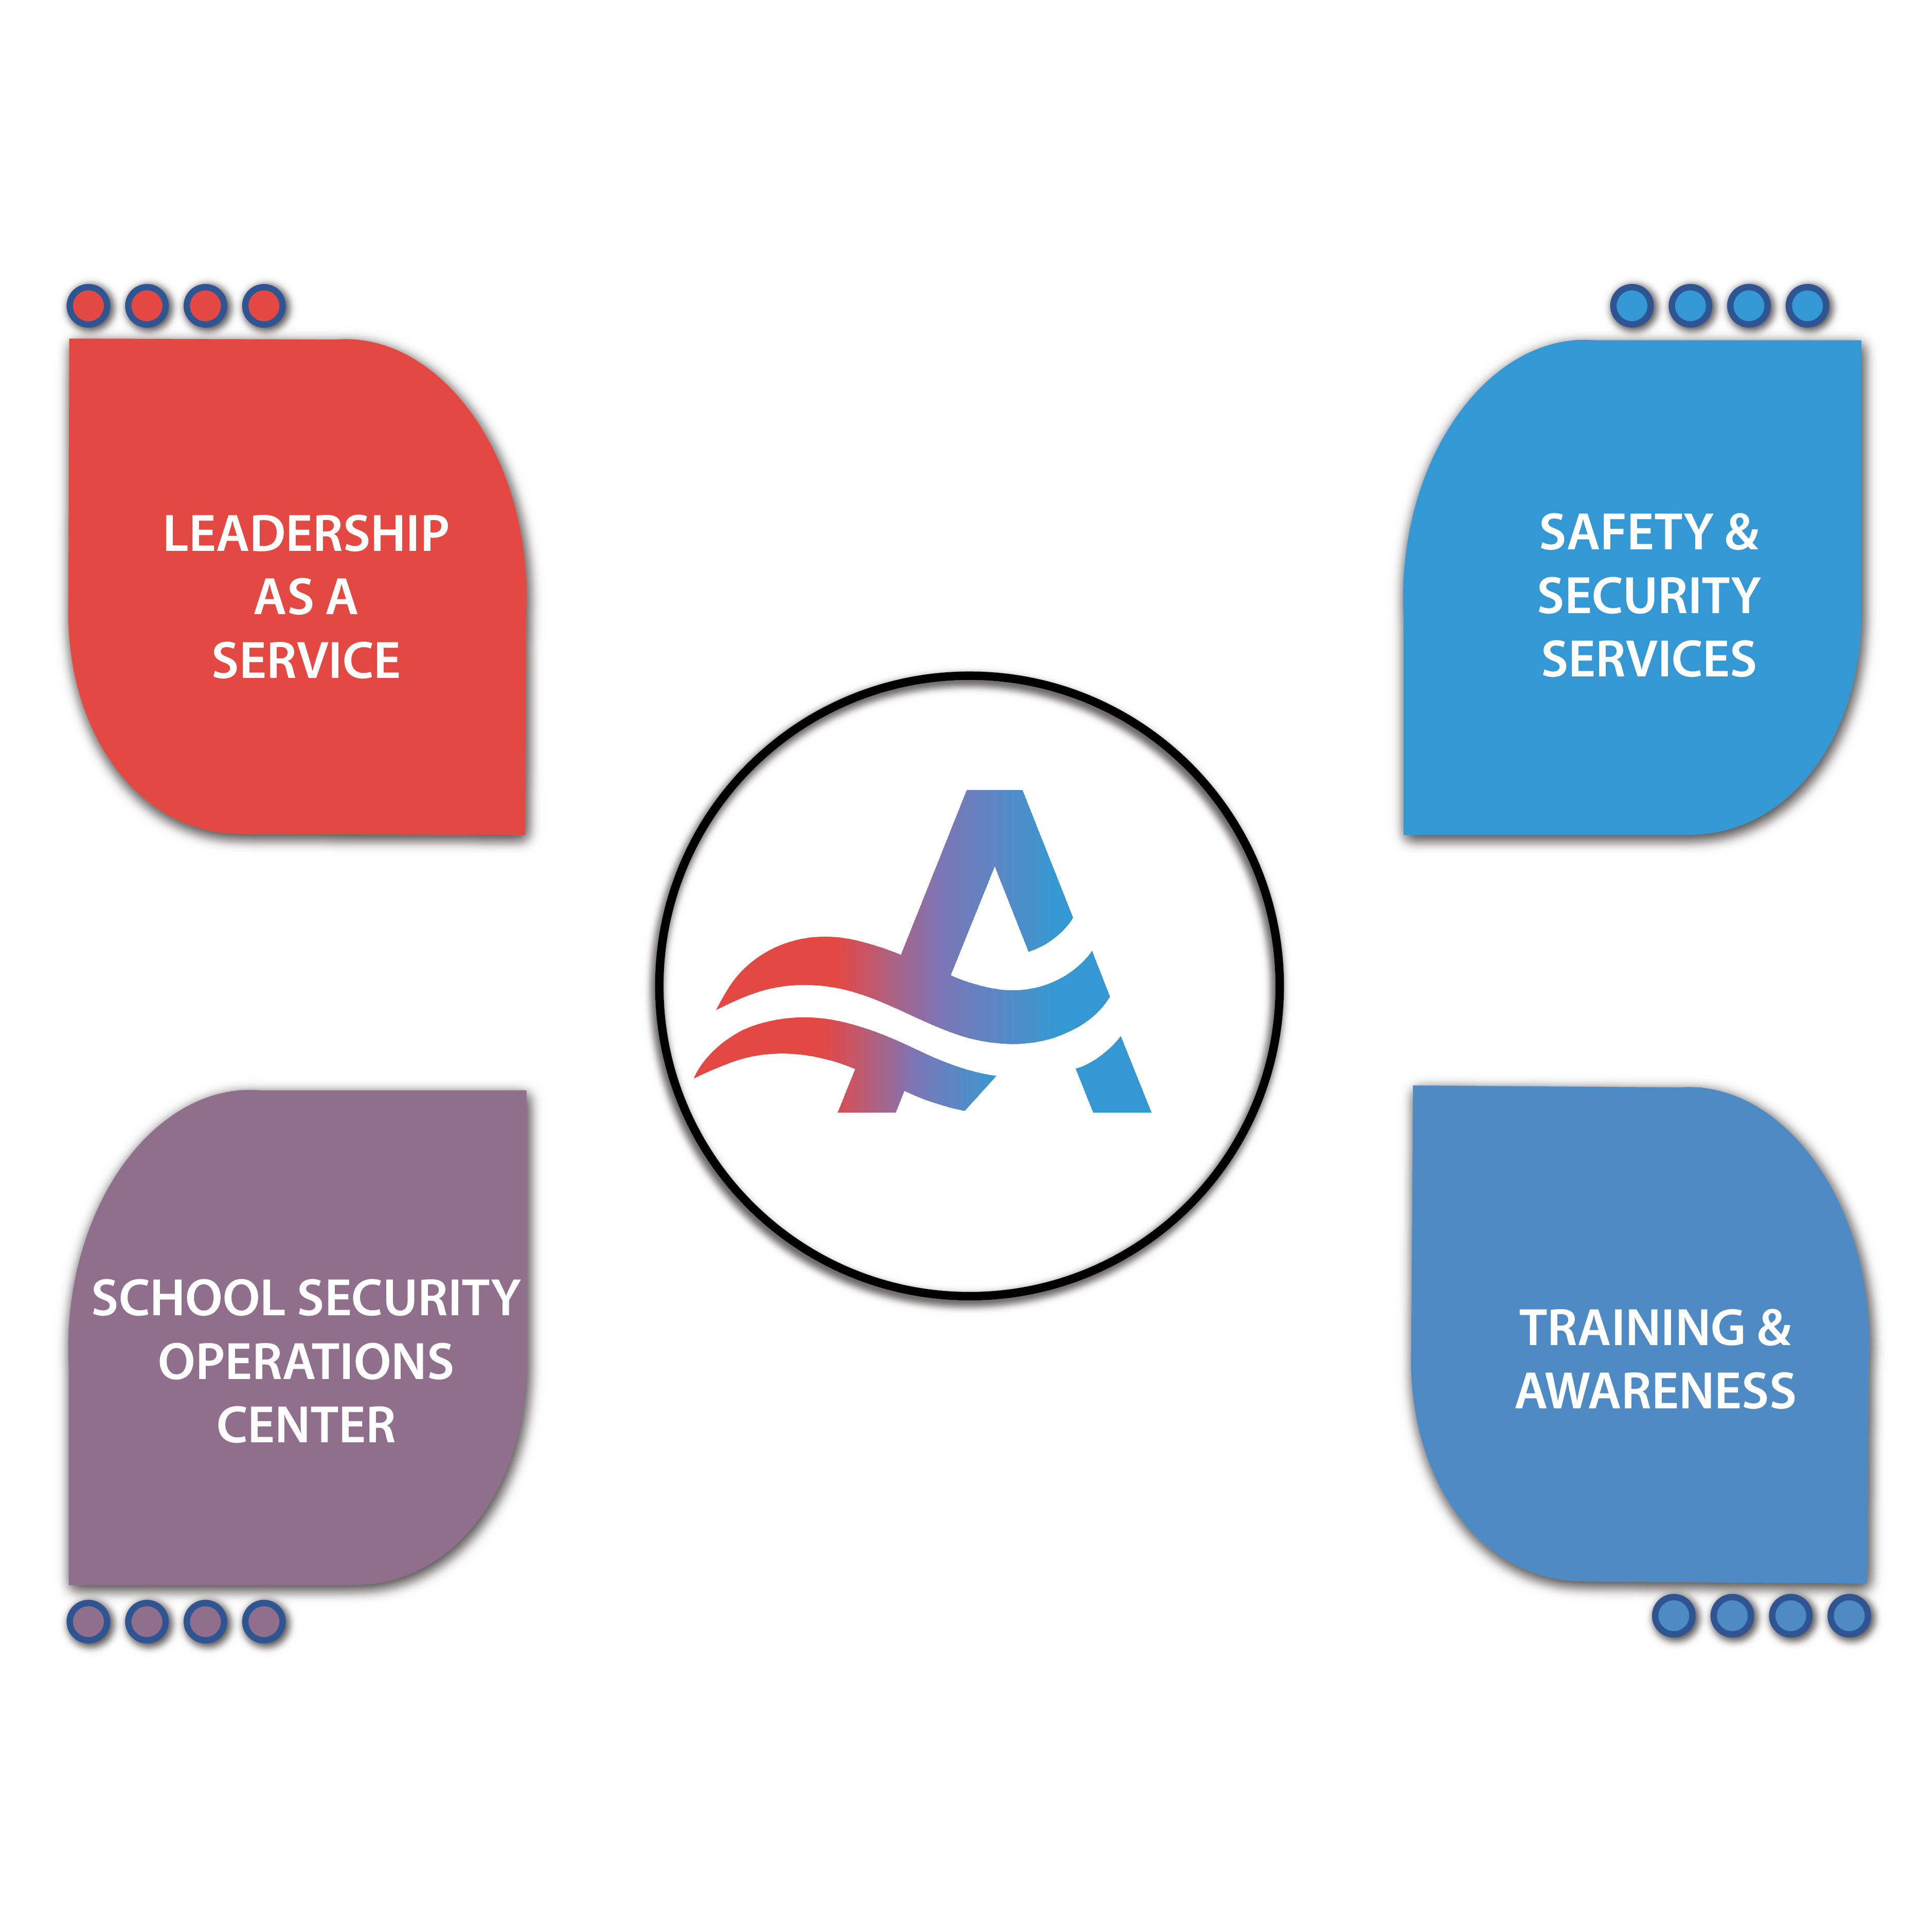 Avertere's Cyber Security Services